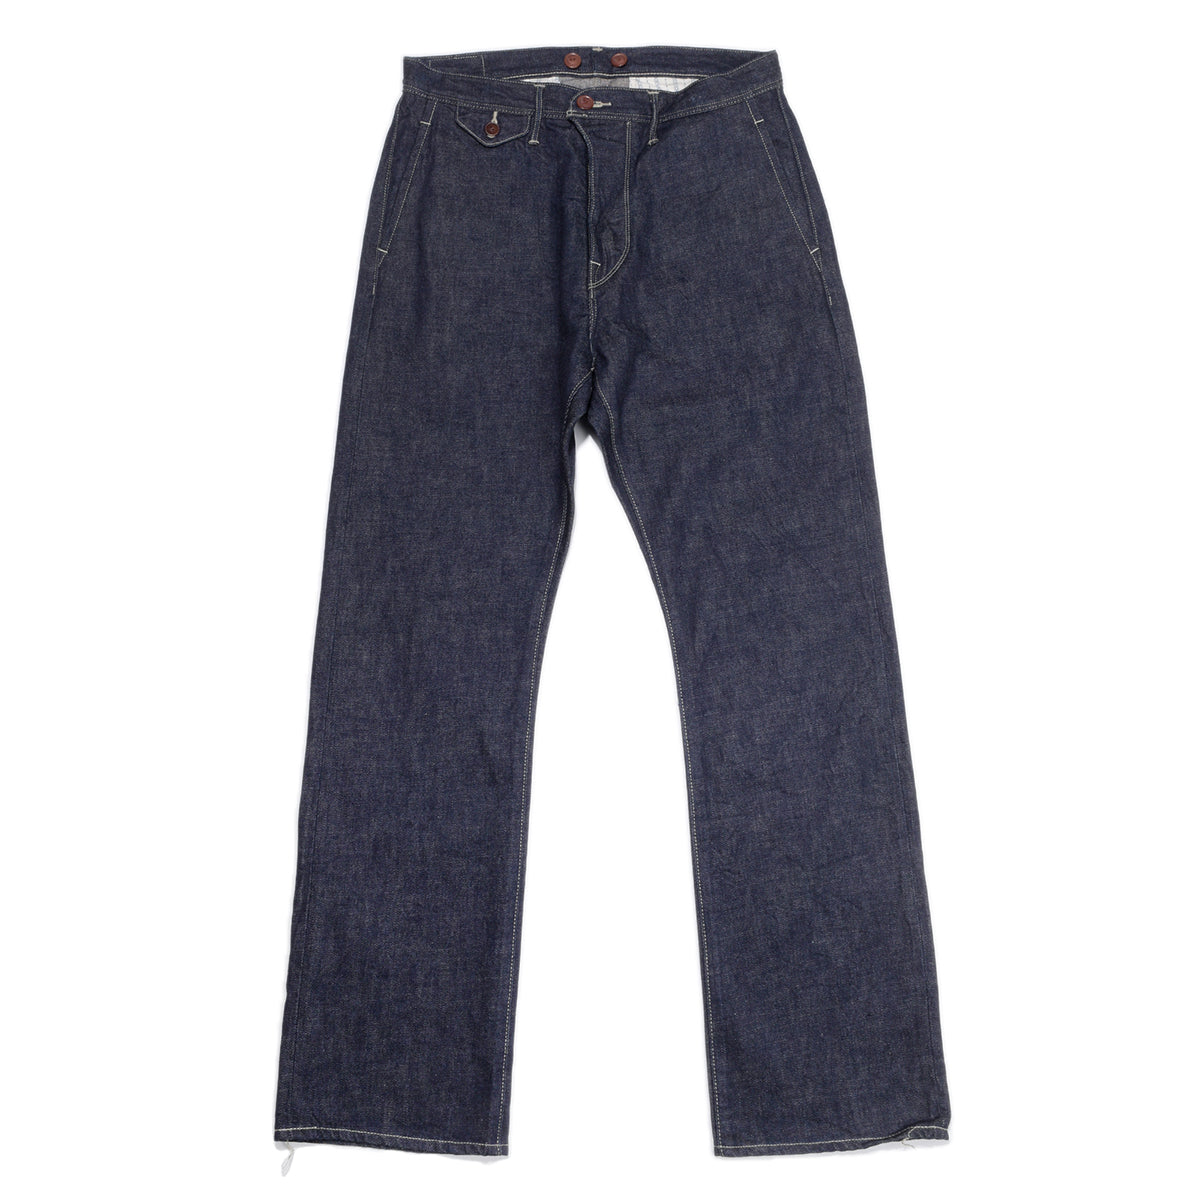 OR-1050A Denim Trousers